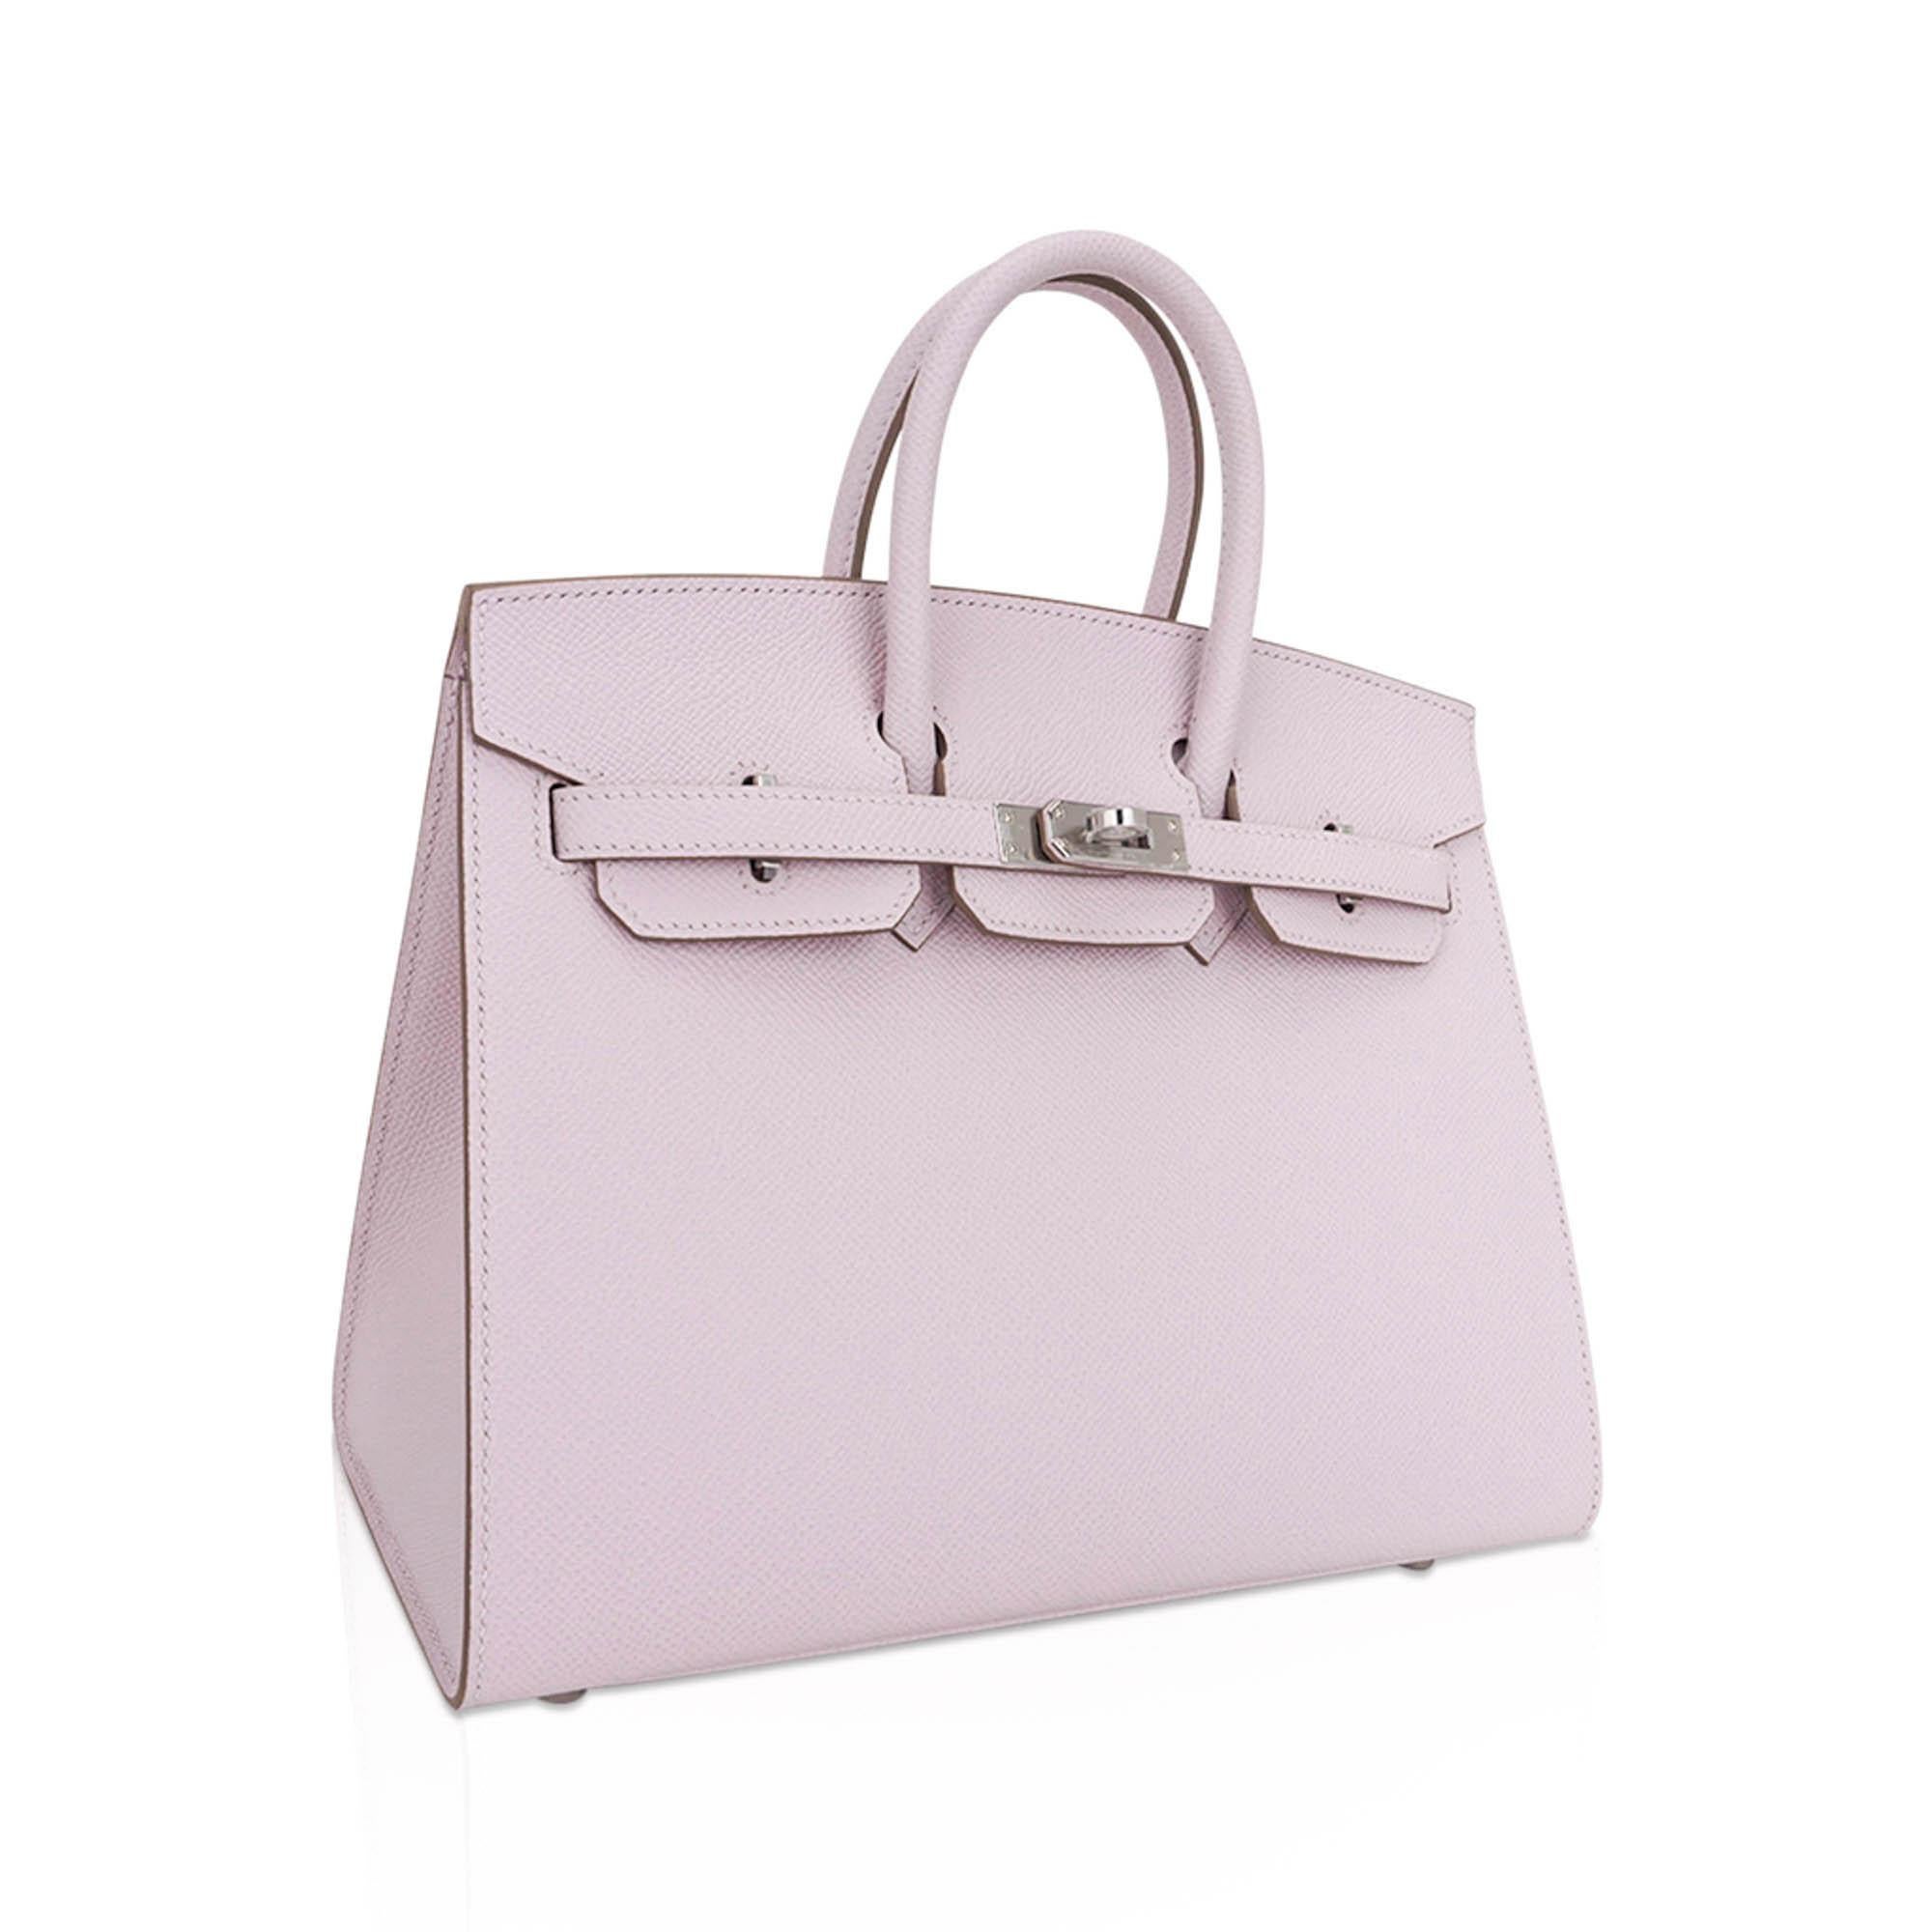 Mightychic offers anHermes Birkin Sellier 25 bag featured in gorgeous soft Mauve Pale.
Perfectly complimented with Palladium hardware.
This exquisite bag is modern and minimalist.
A sleek pared down version that exudes chic sophistication.
Epsom